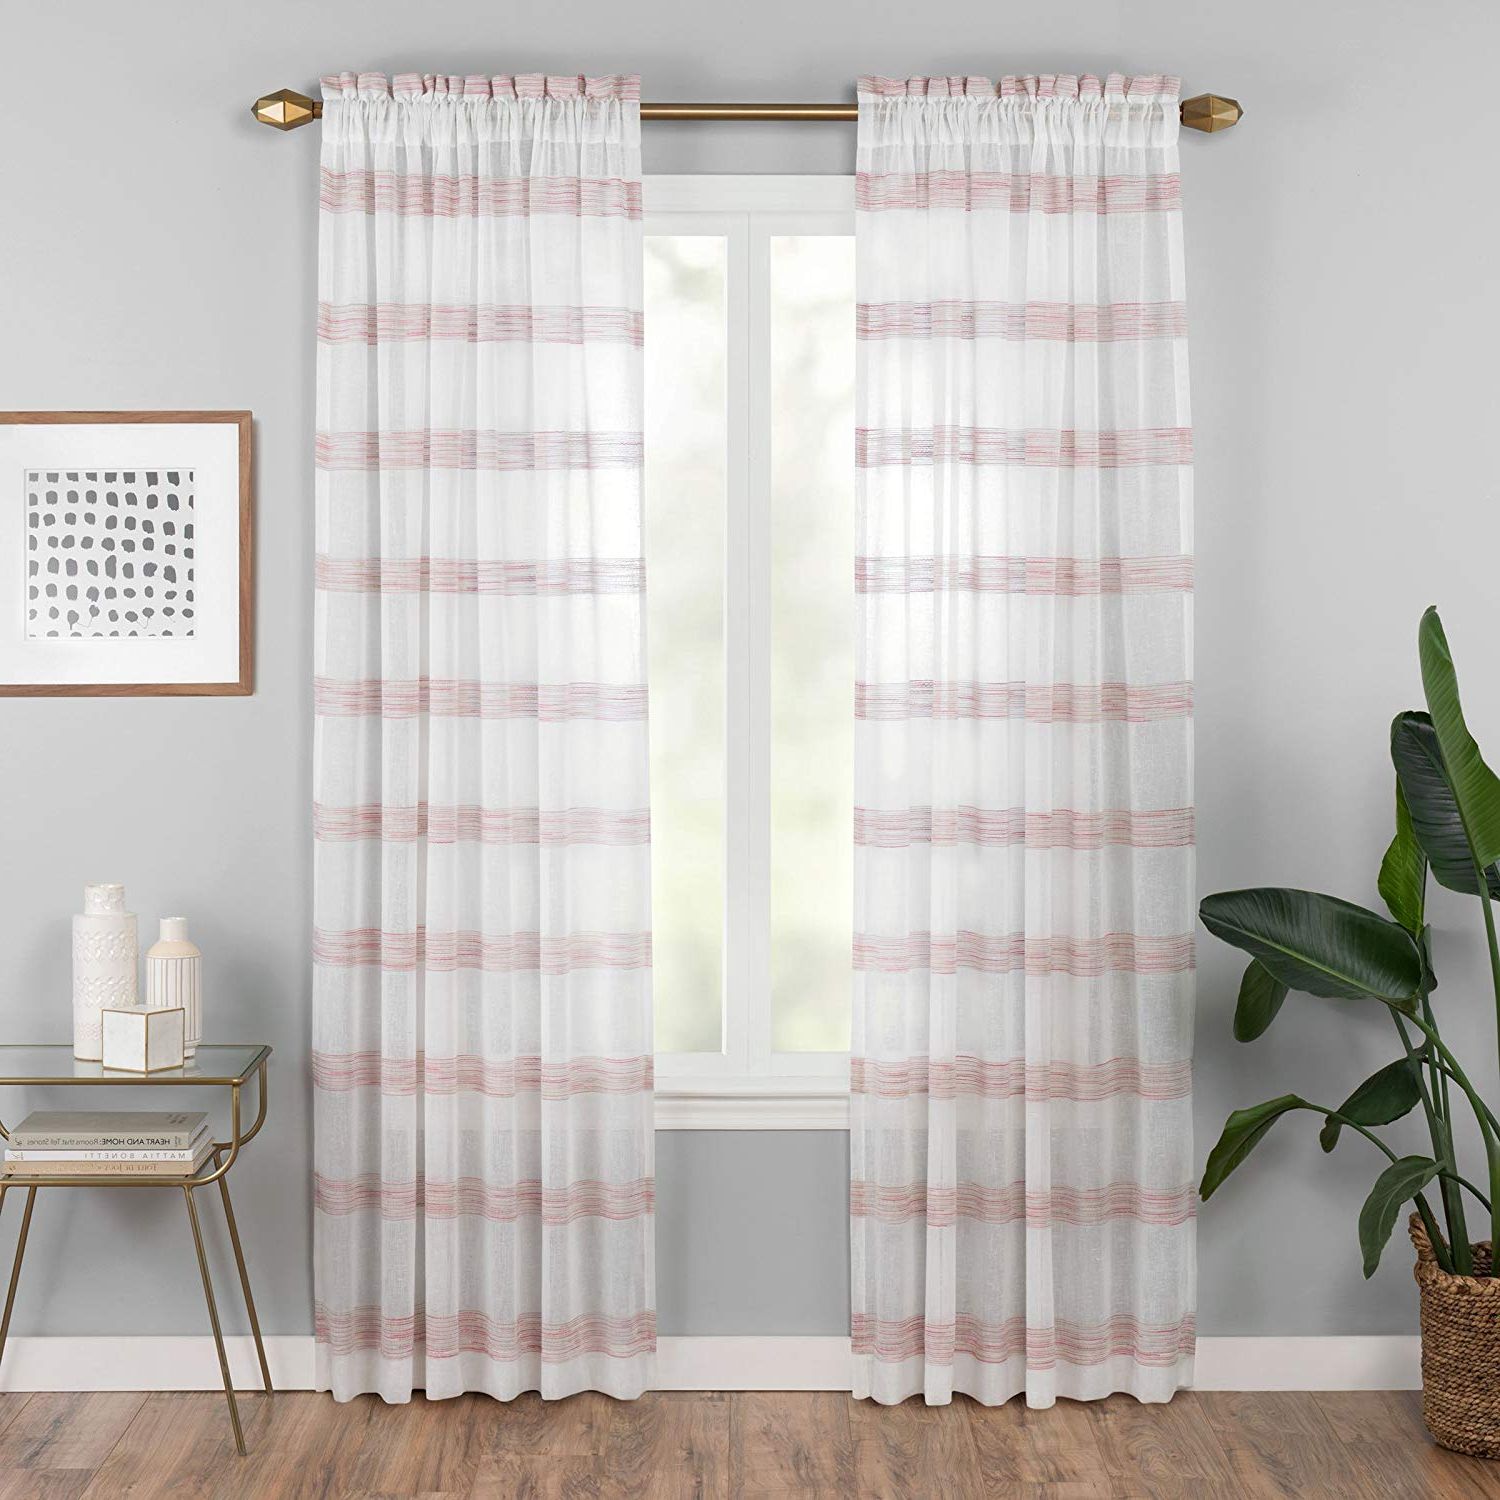 Vue Elements Priya Tab Top Window Curtains With Regard To Widely Used Amazon: Vue Kyoto Semi Sheer Window Curtain Panel 52x (View 14 of 20)